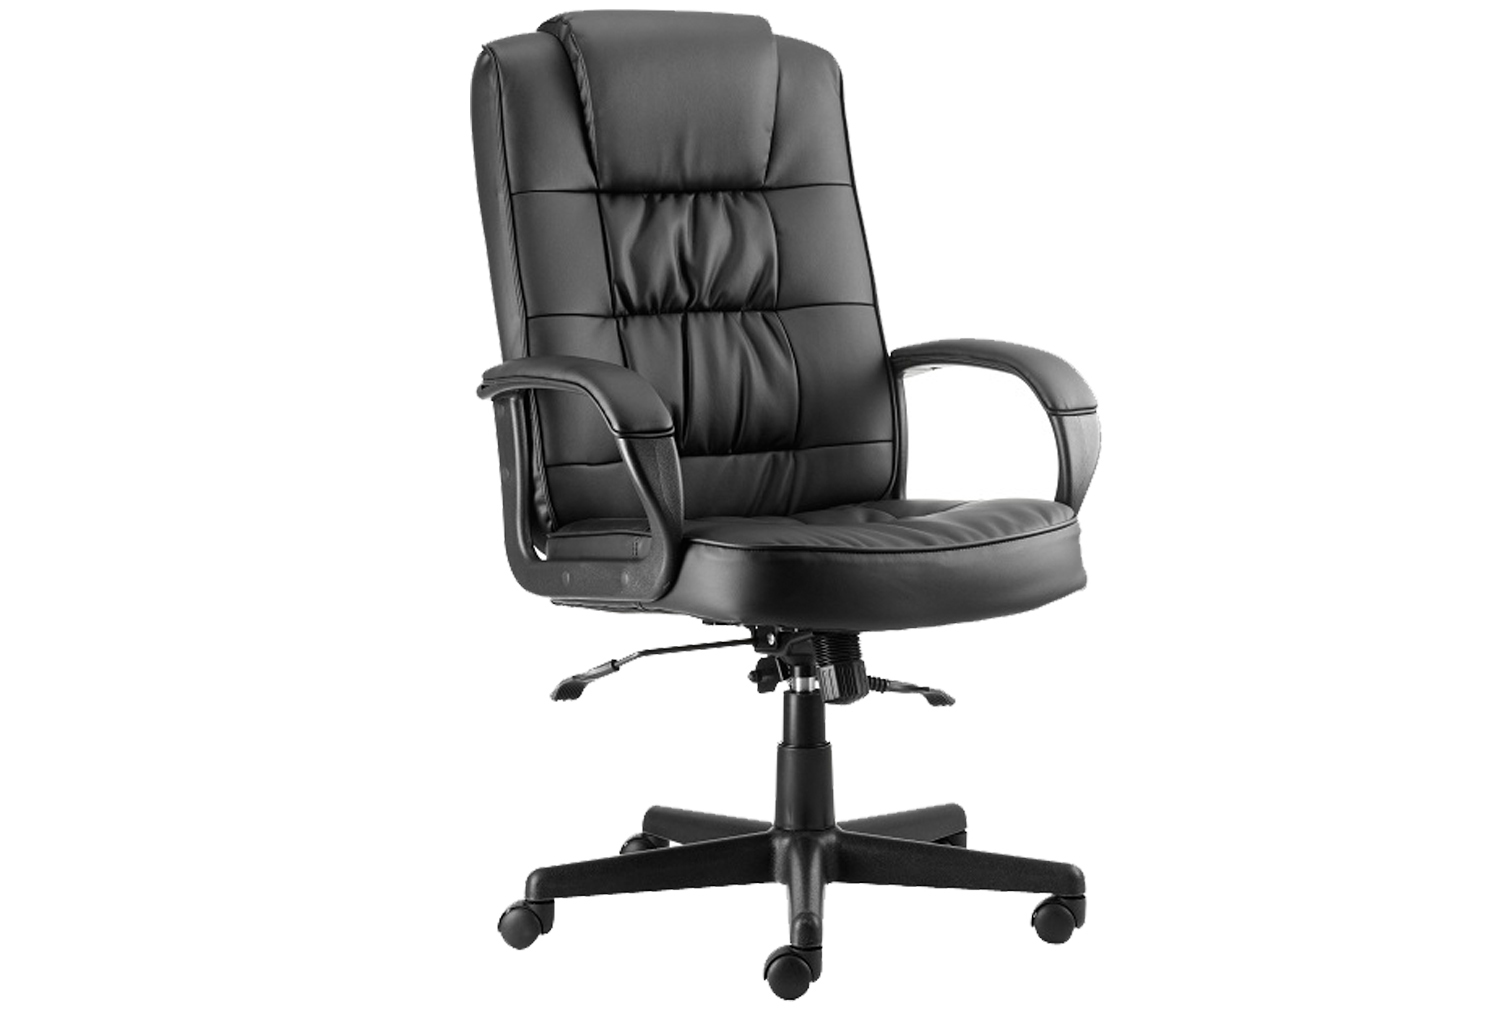 Muscat Leather Faced Executive Office Chair, Black, Express Delivery